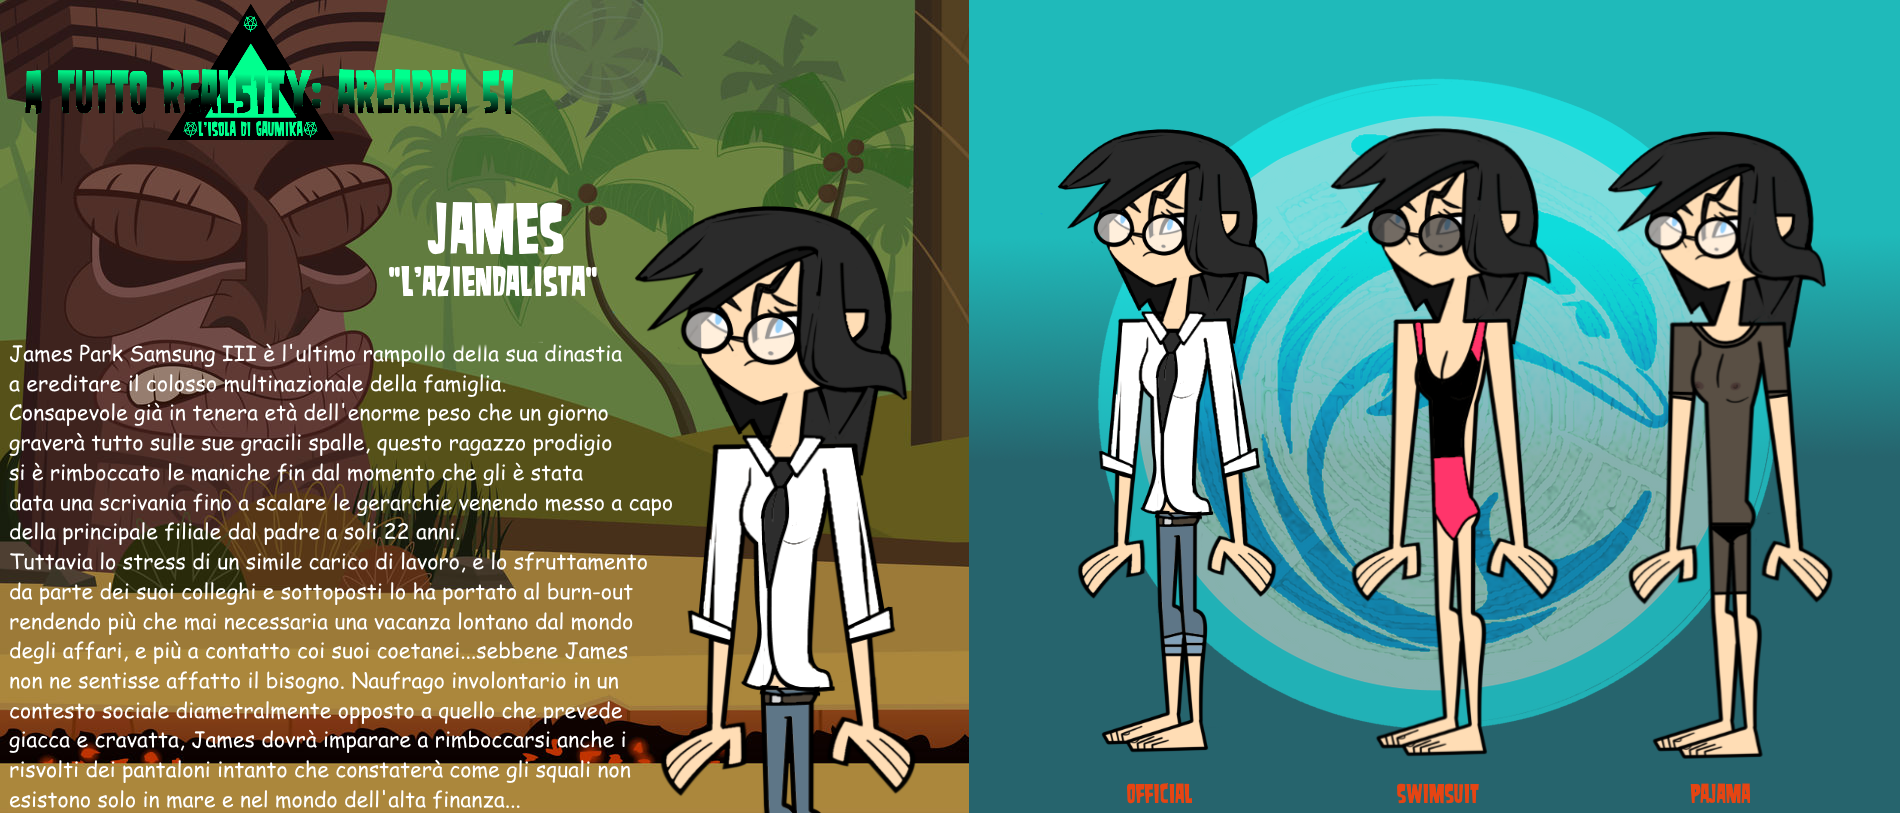 Total Drama OCs: Yeah-10101 by Sol-Domino on DeviantArt